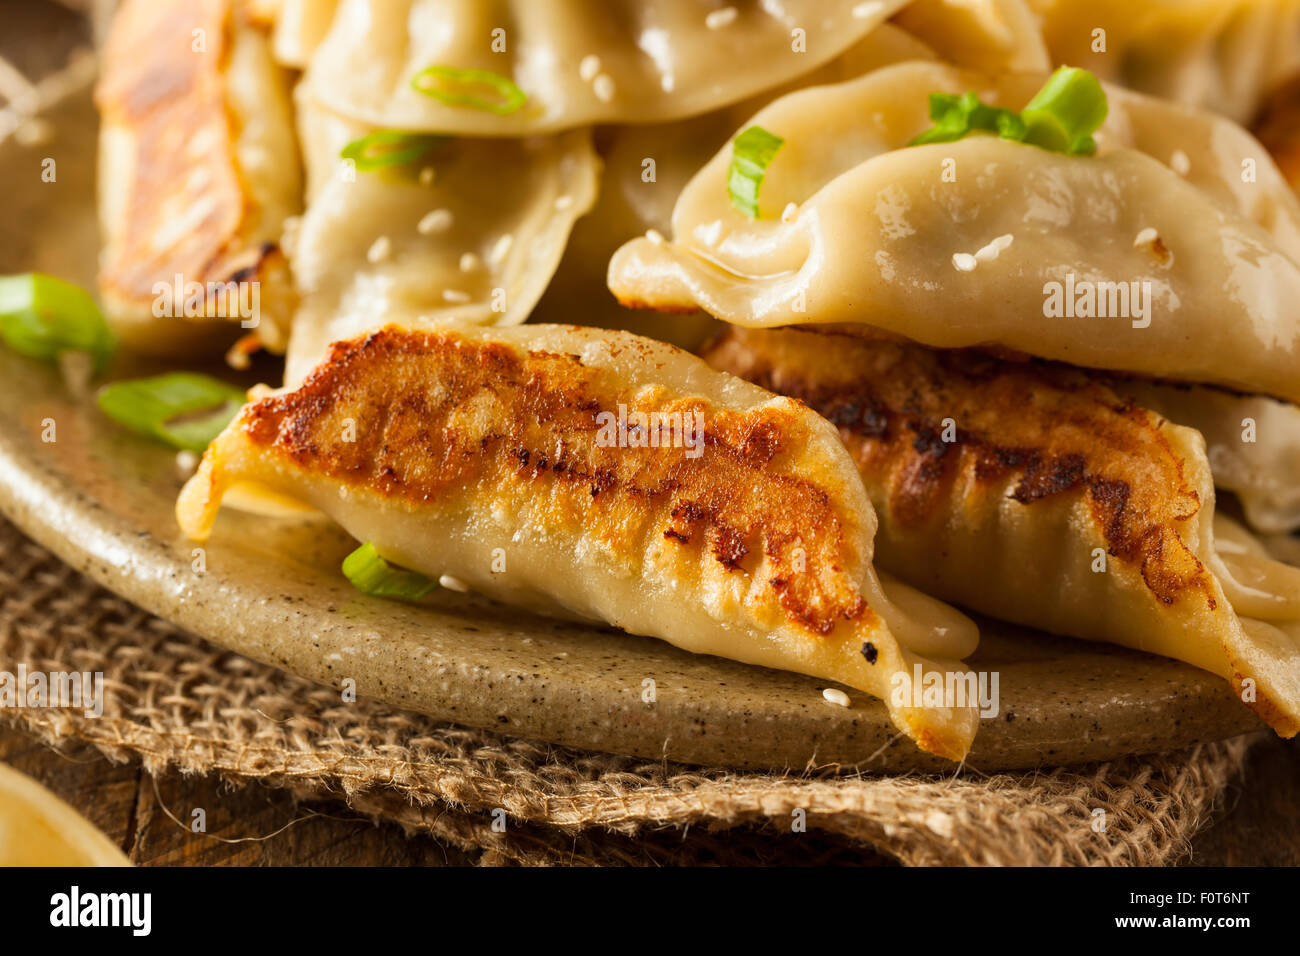 Homemade Asian Pork Potstickers with Soy Sauce Stock Photo